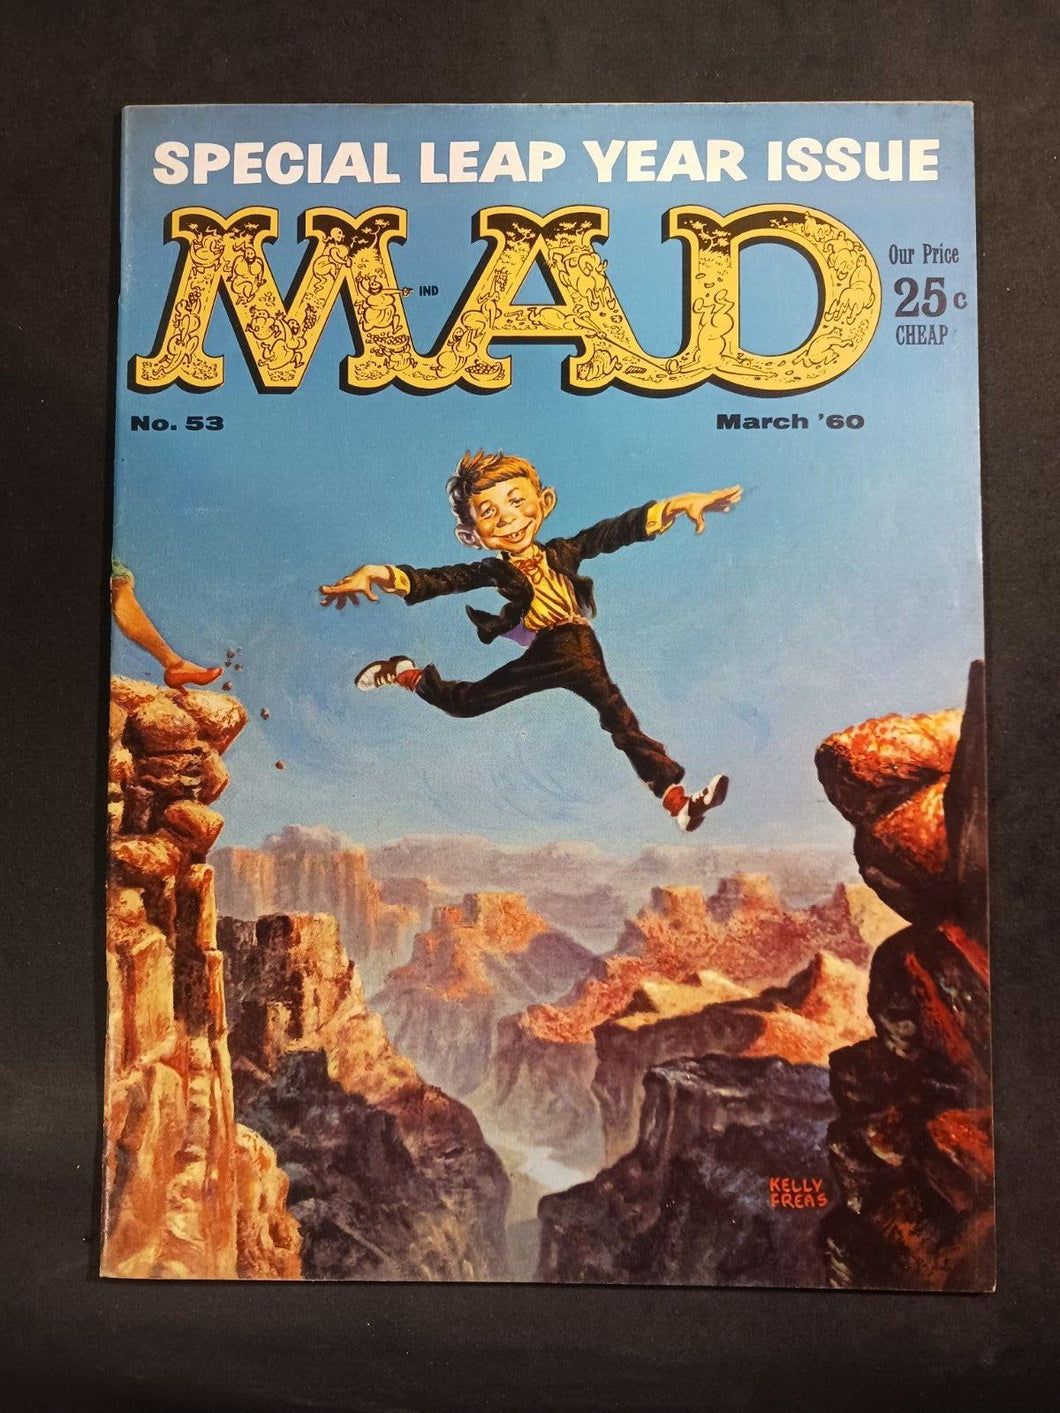 MAD Magazine #53 Special Leap Year Issue (March 1960) - VF-NM 9.0